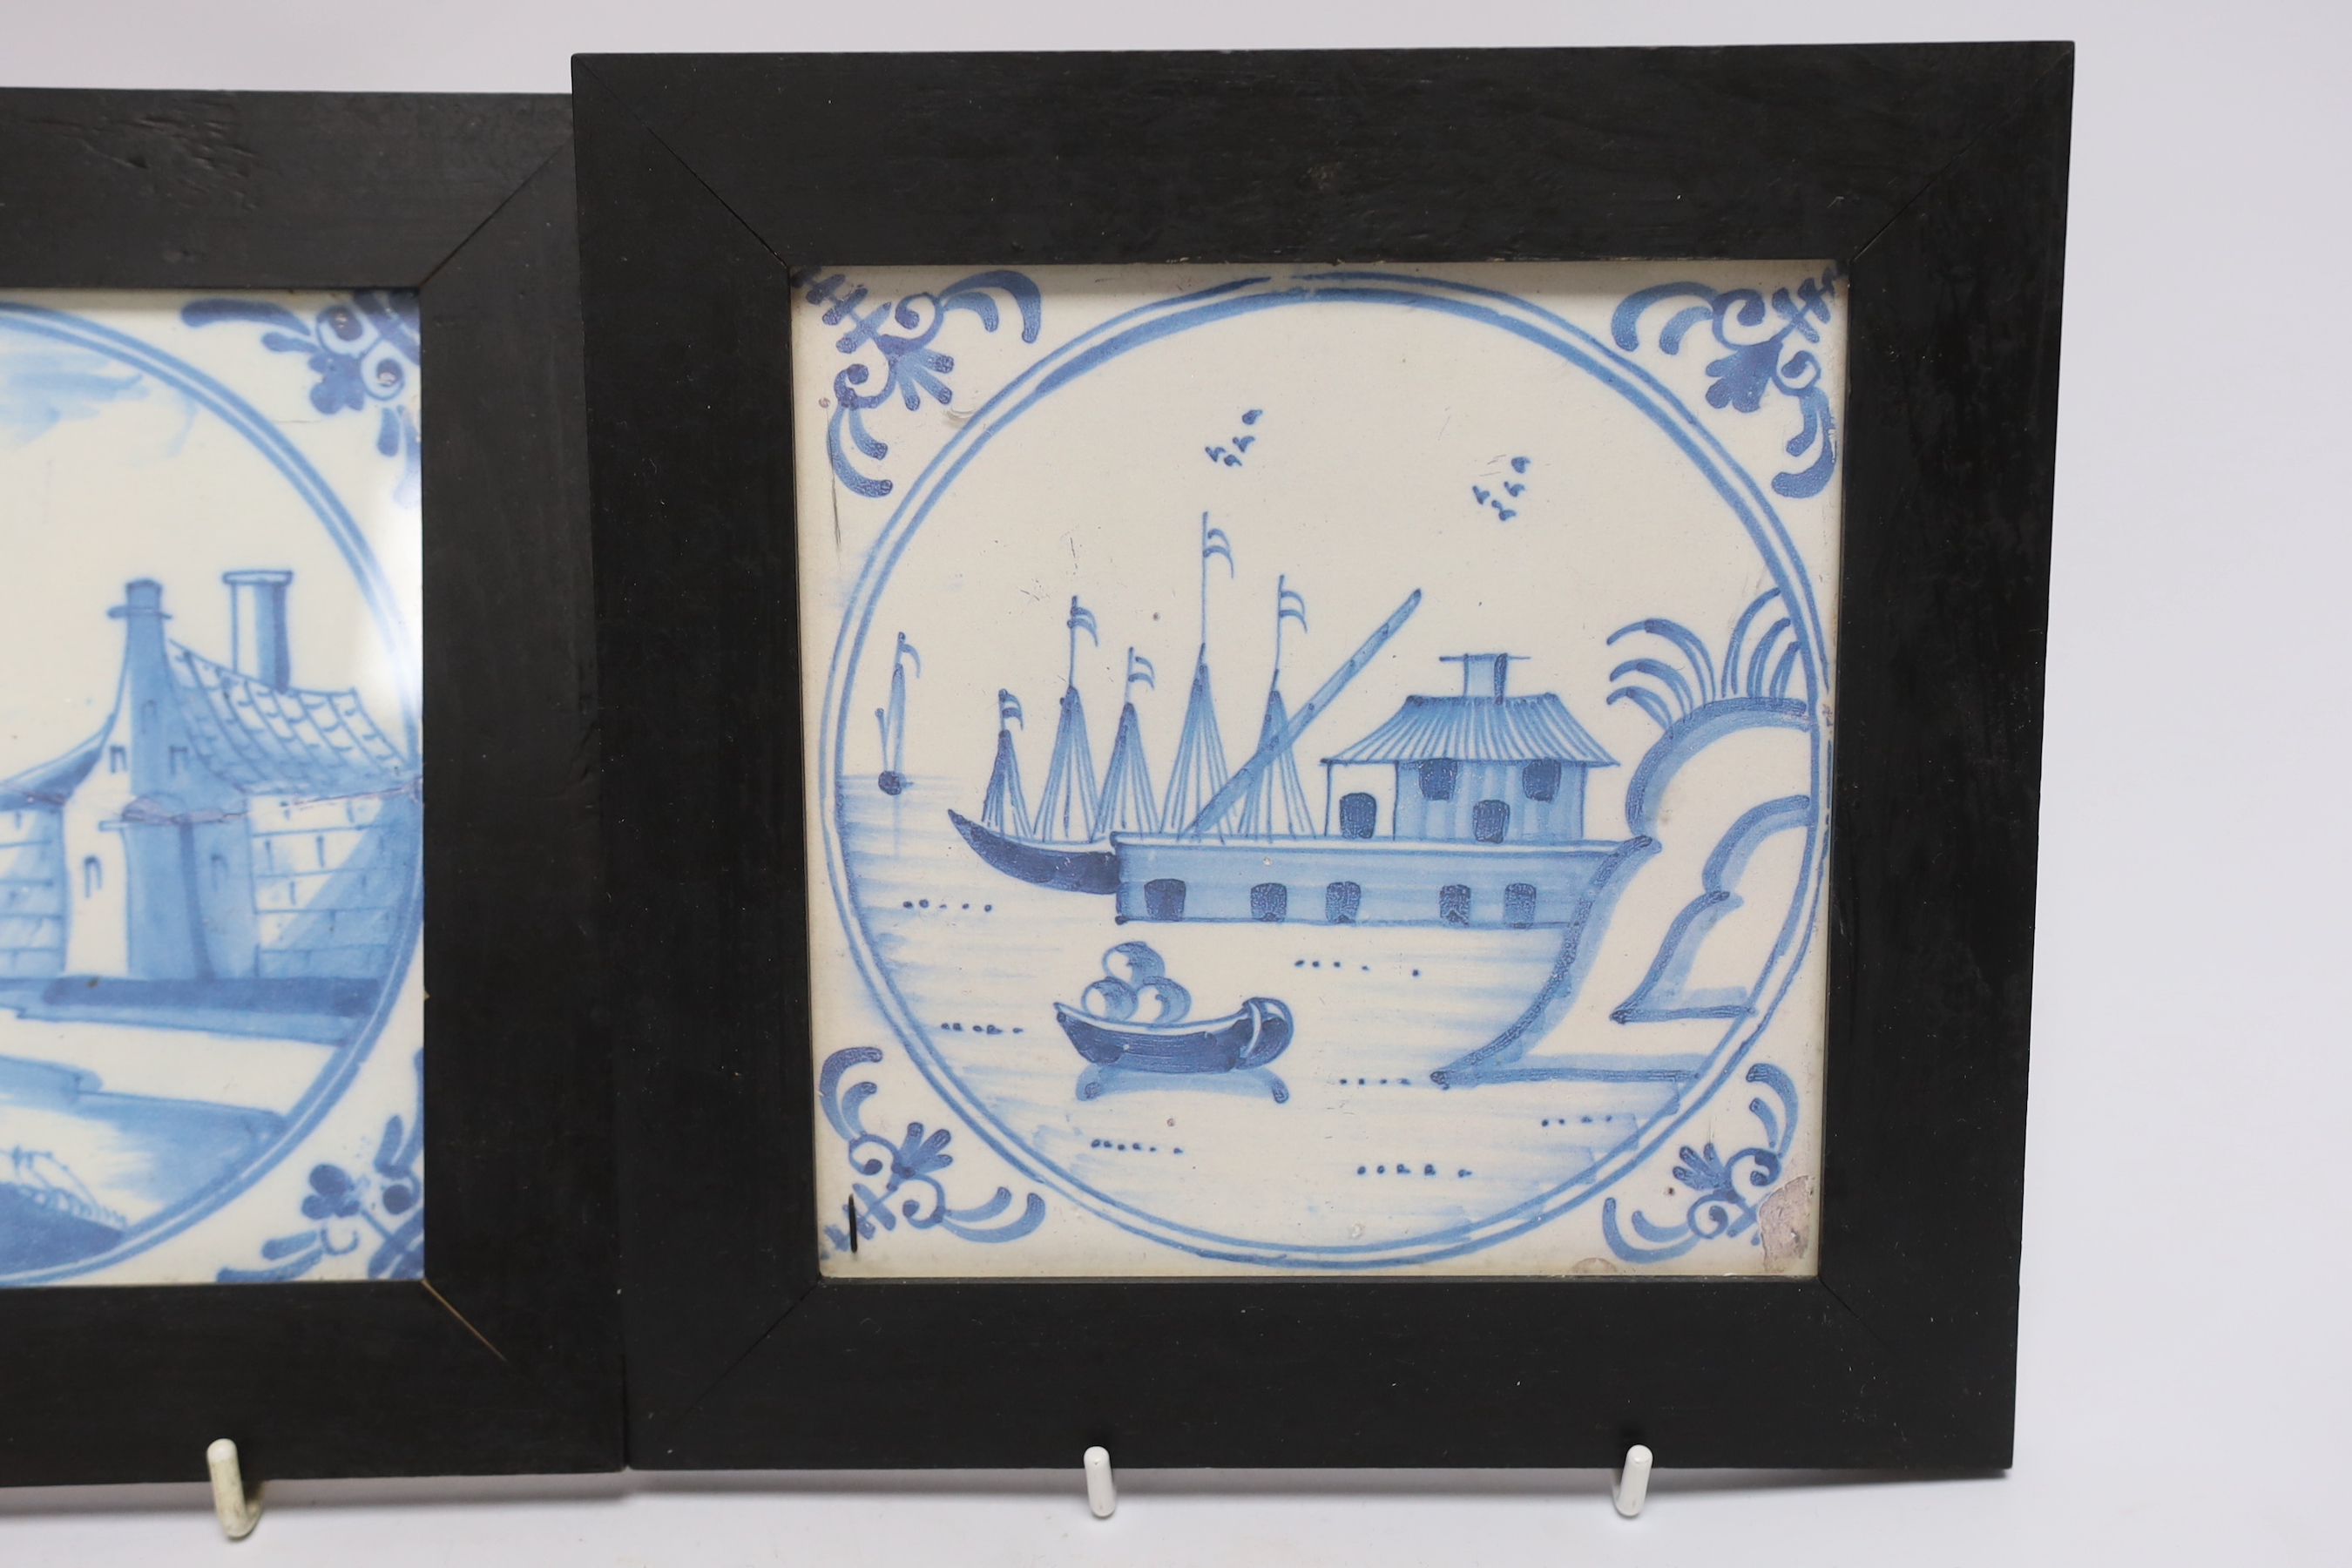 Two framed prints of 18th century Delft blue and white tiles